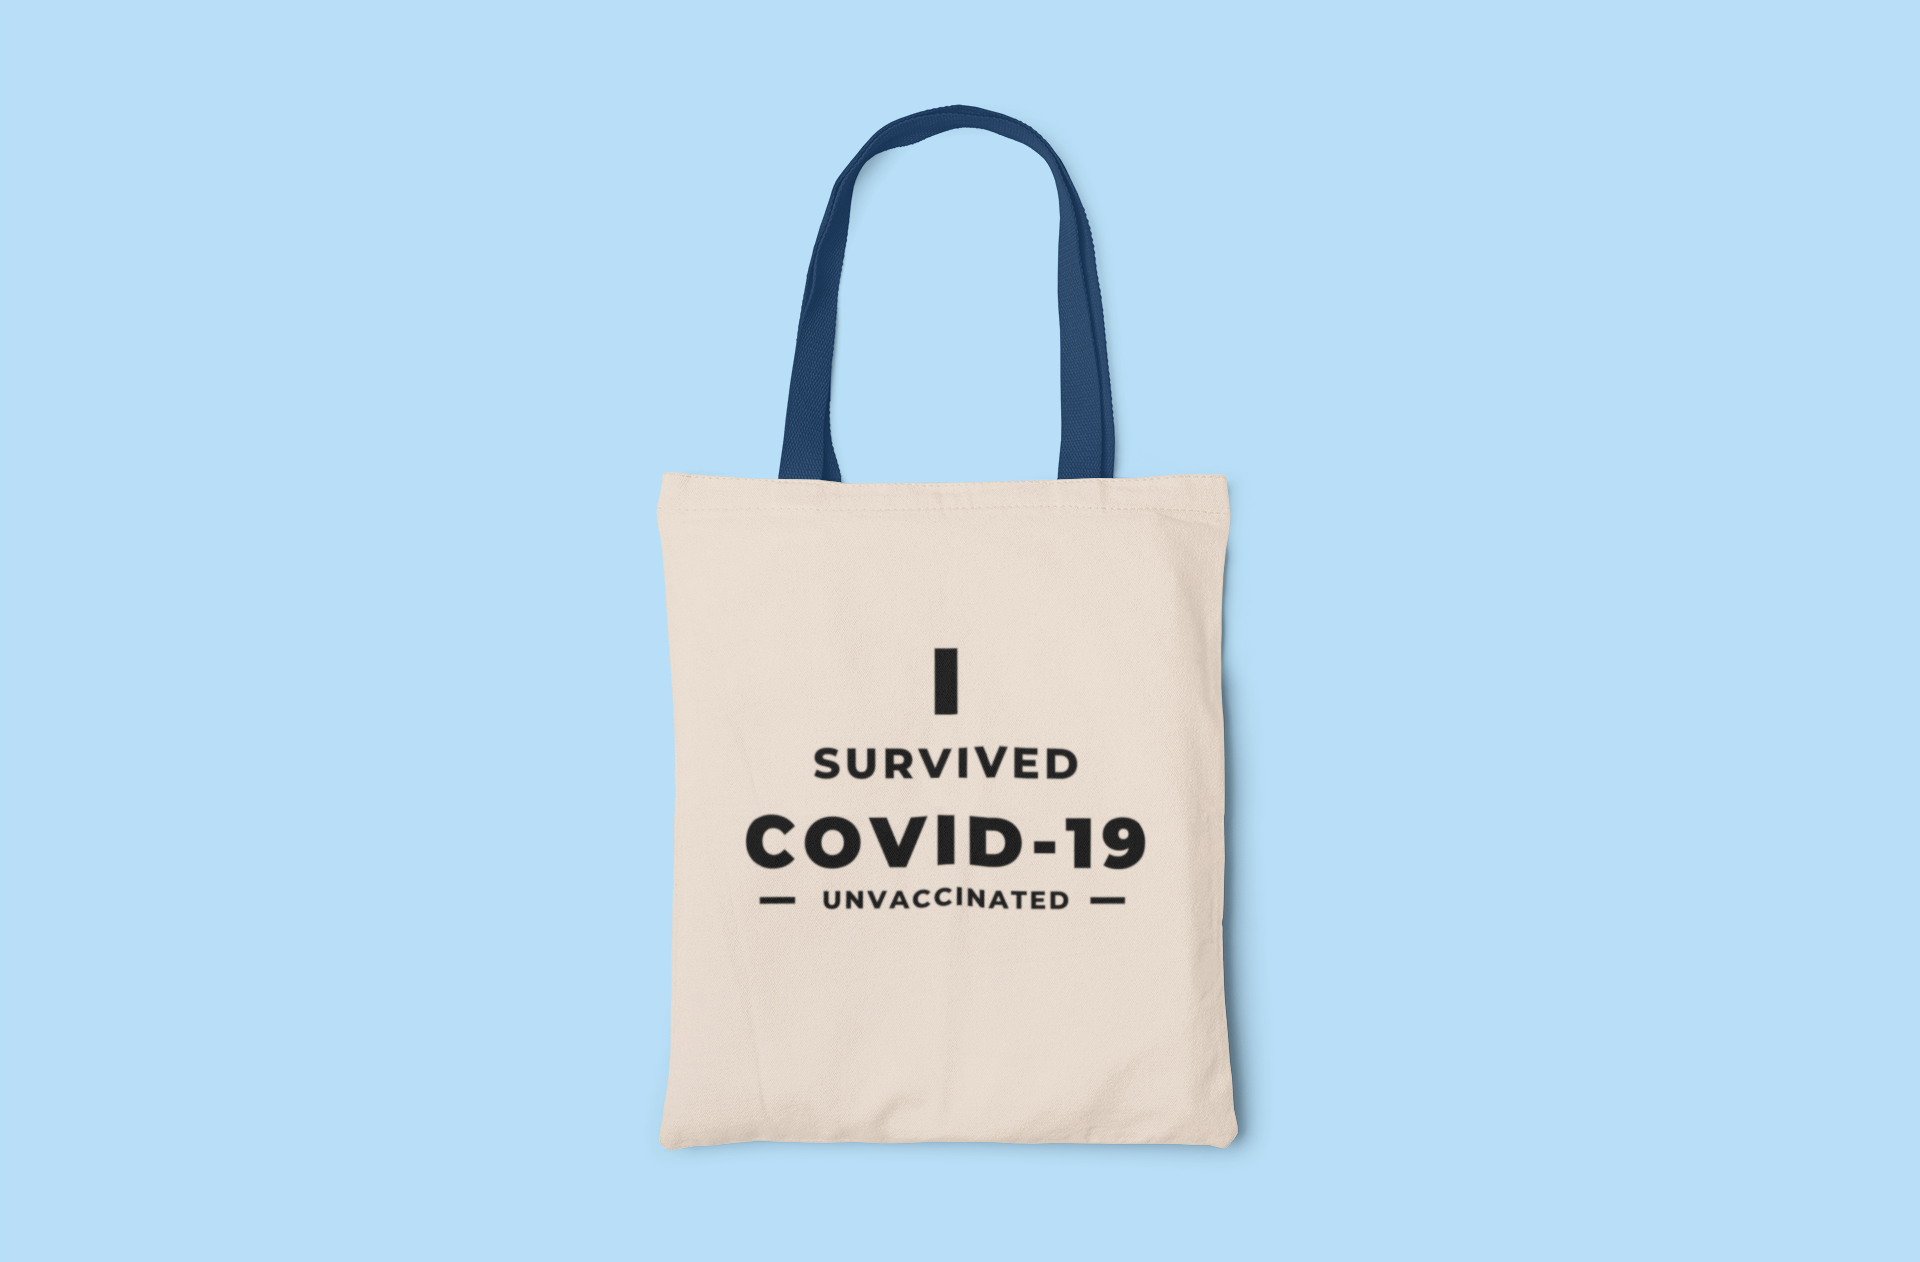 In Survived Covid-19 Tote Bag